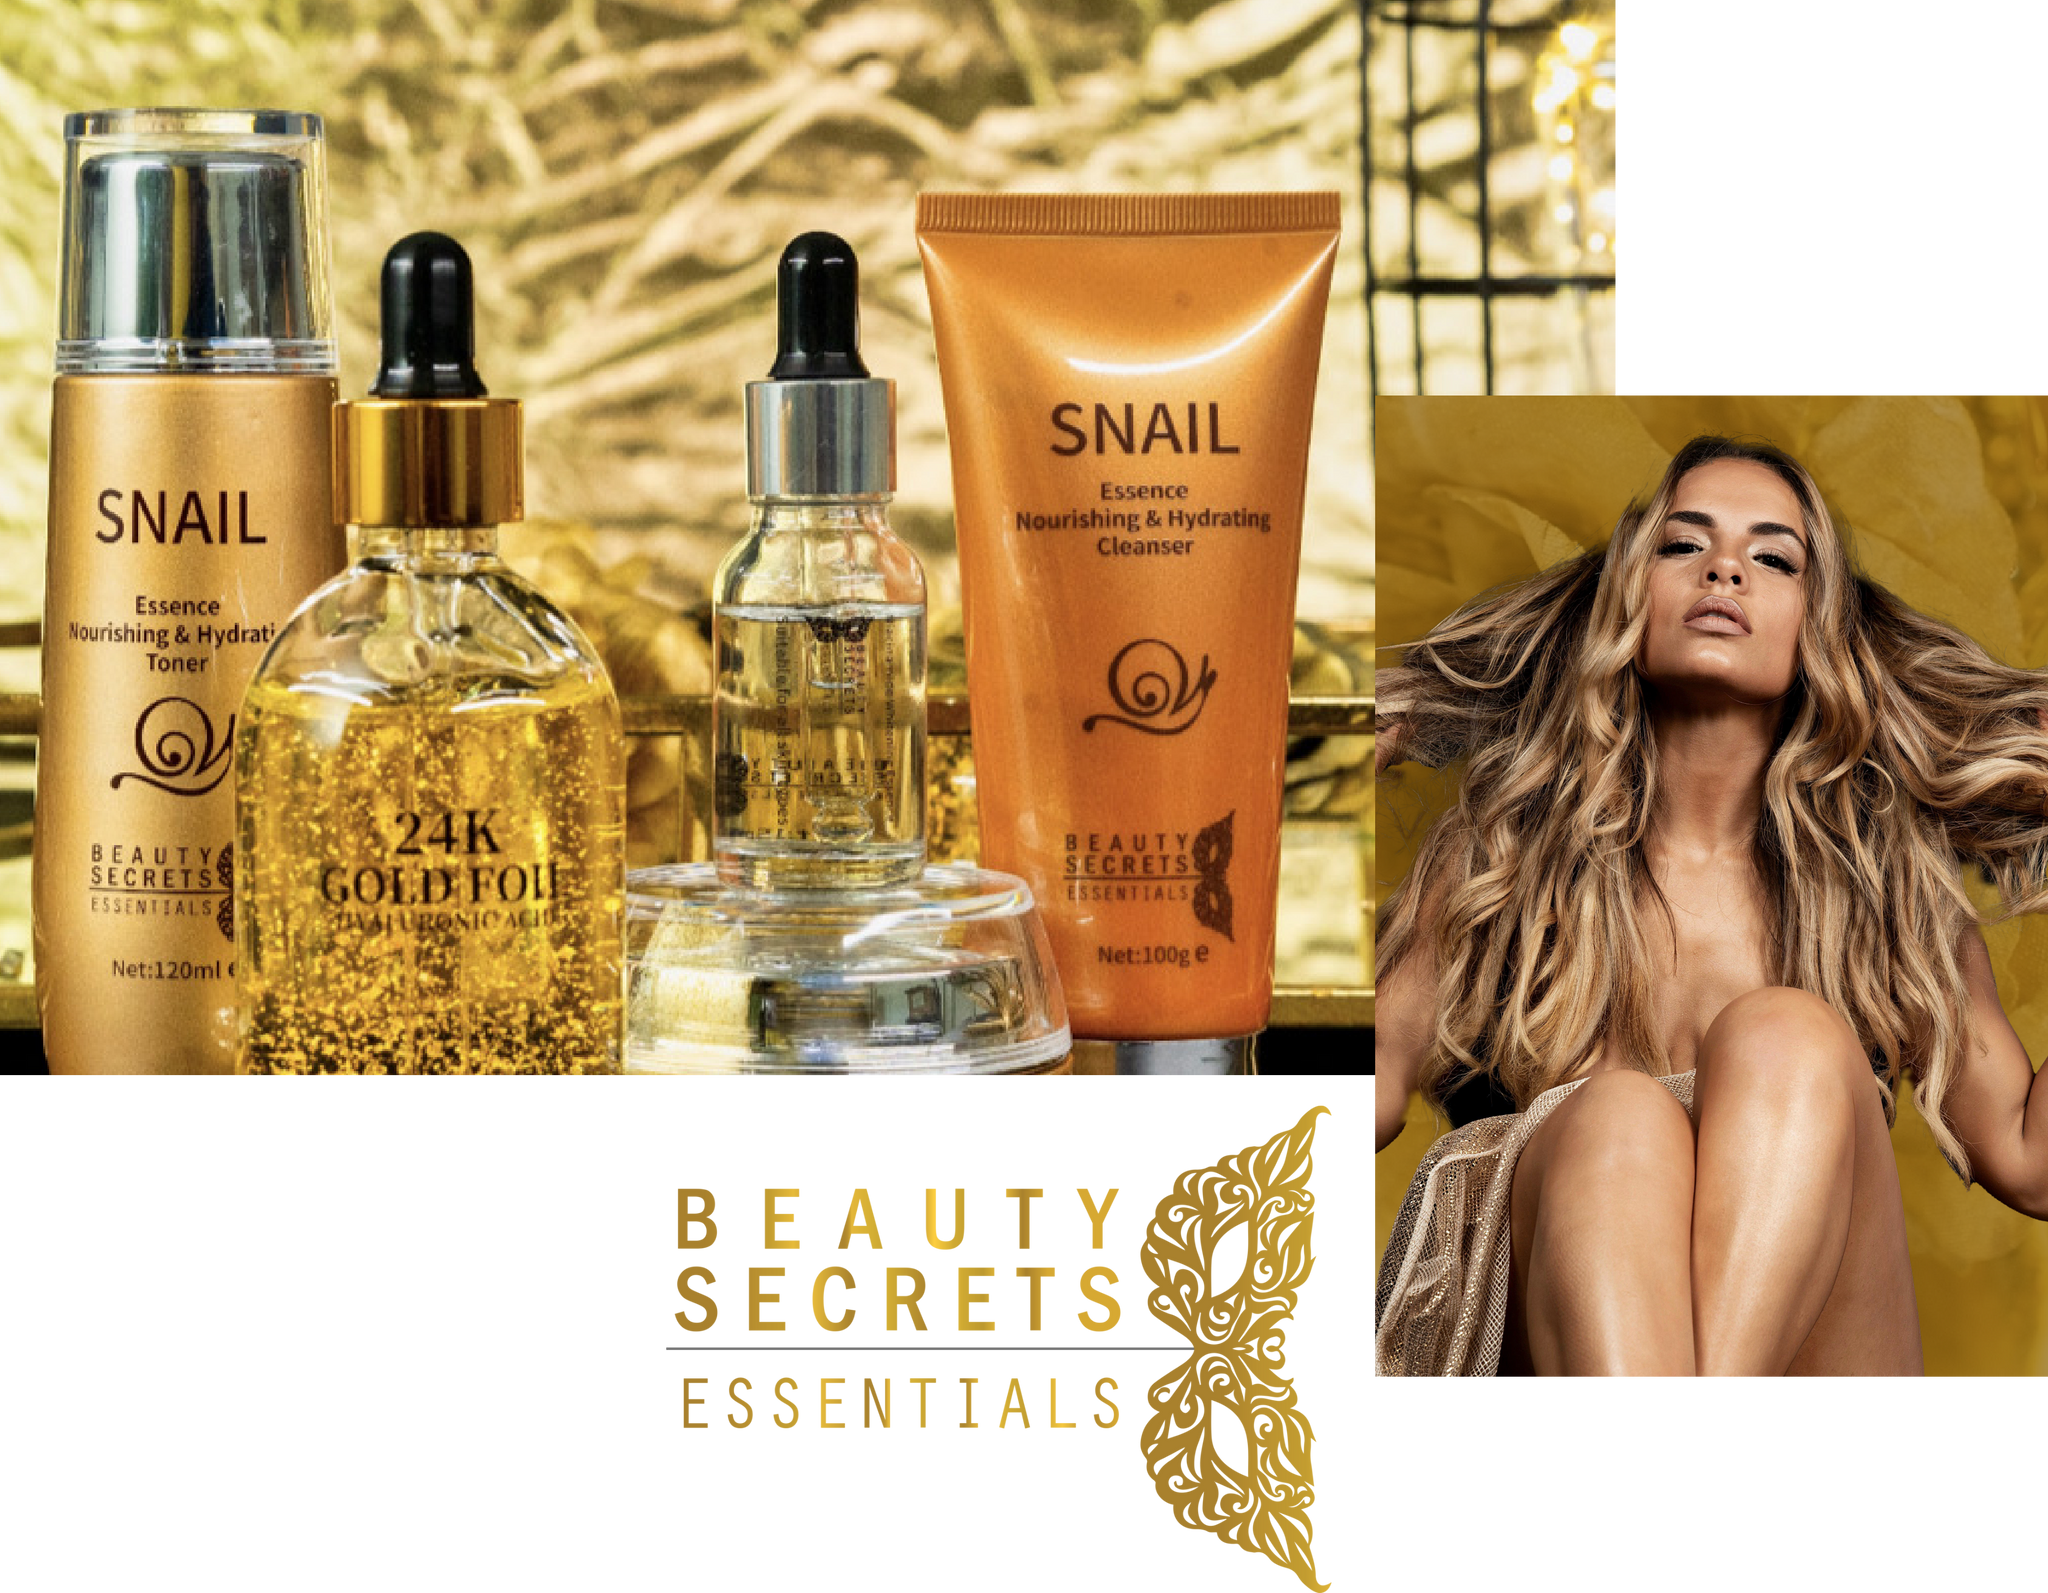 All Beauty Secrets Essentials products in gold background with an image of a sitting woman with long curly brown hair that has a very smooth, hydrated and clear skin.